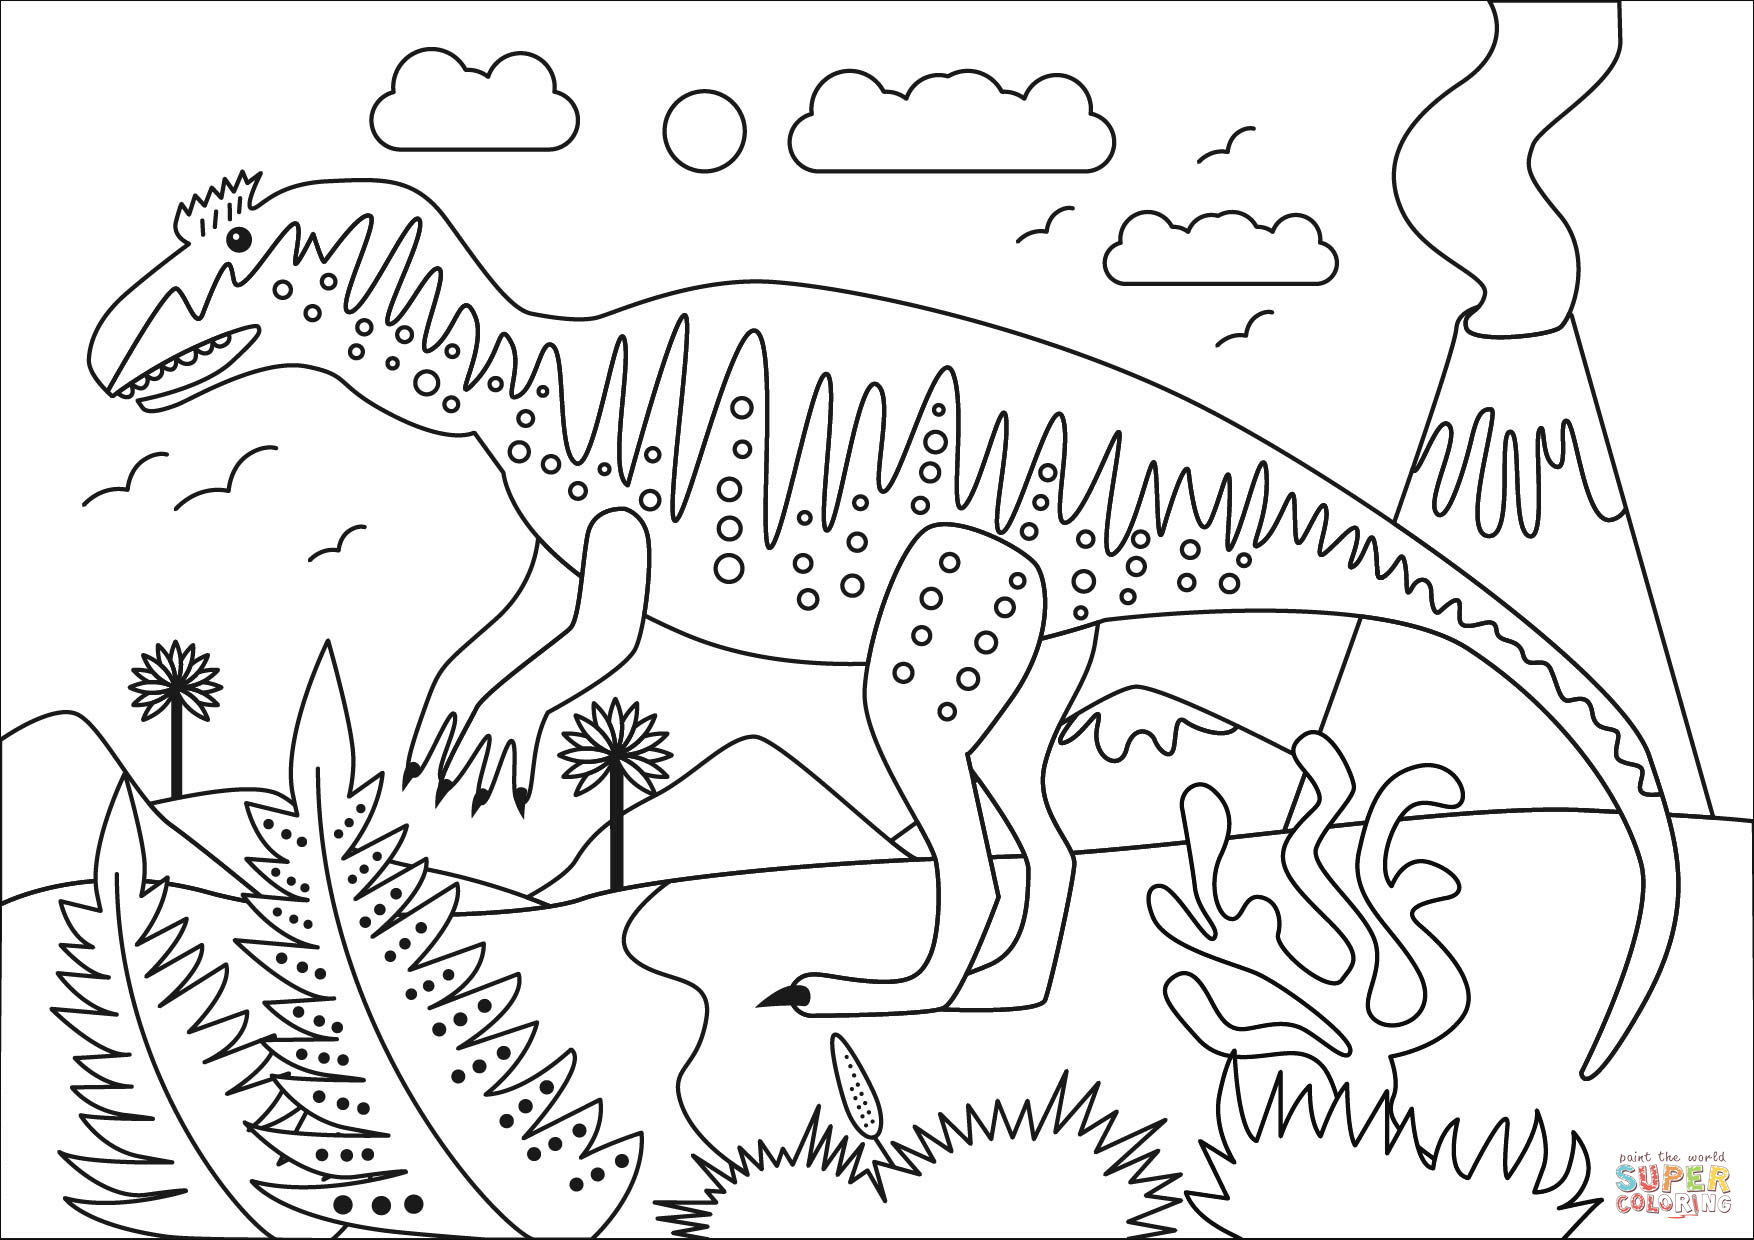 Metriacanthosaurus coloring page For child